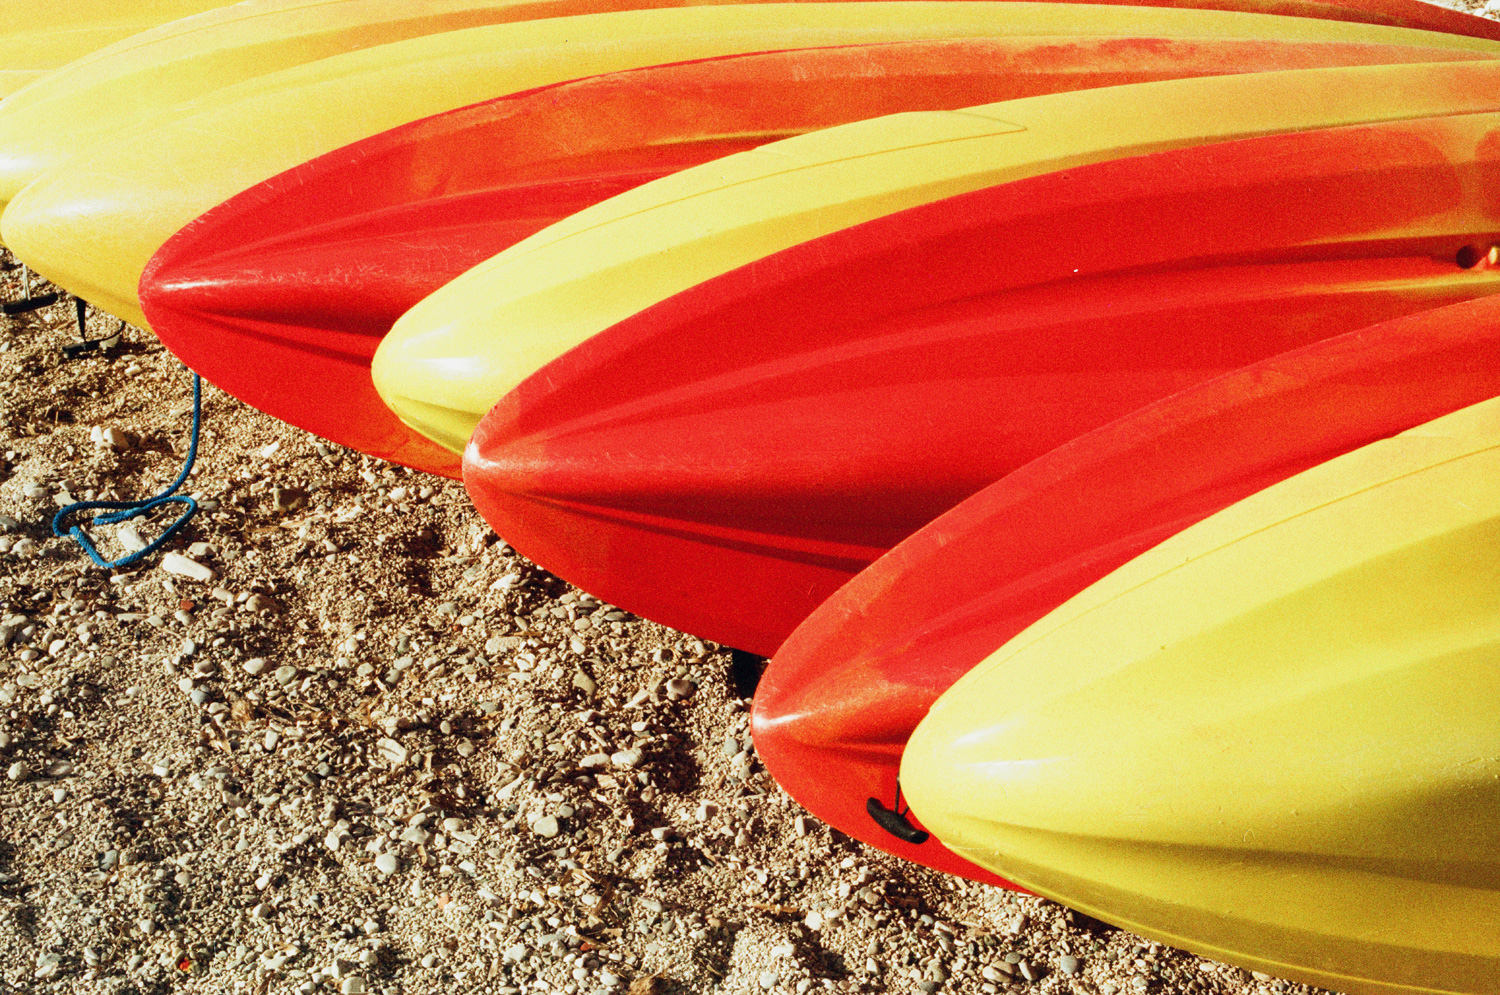 Red and yellow boats on beach (Pic: Courtesy of Adox)